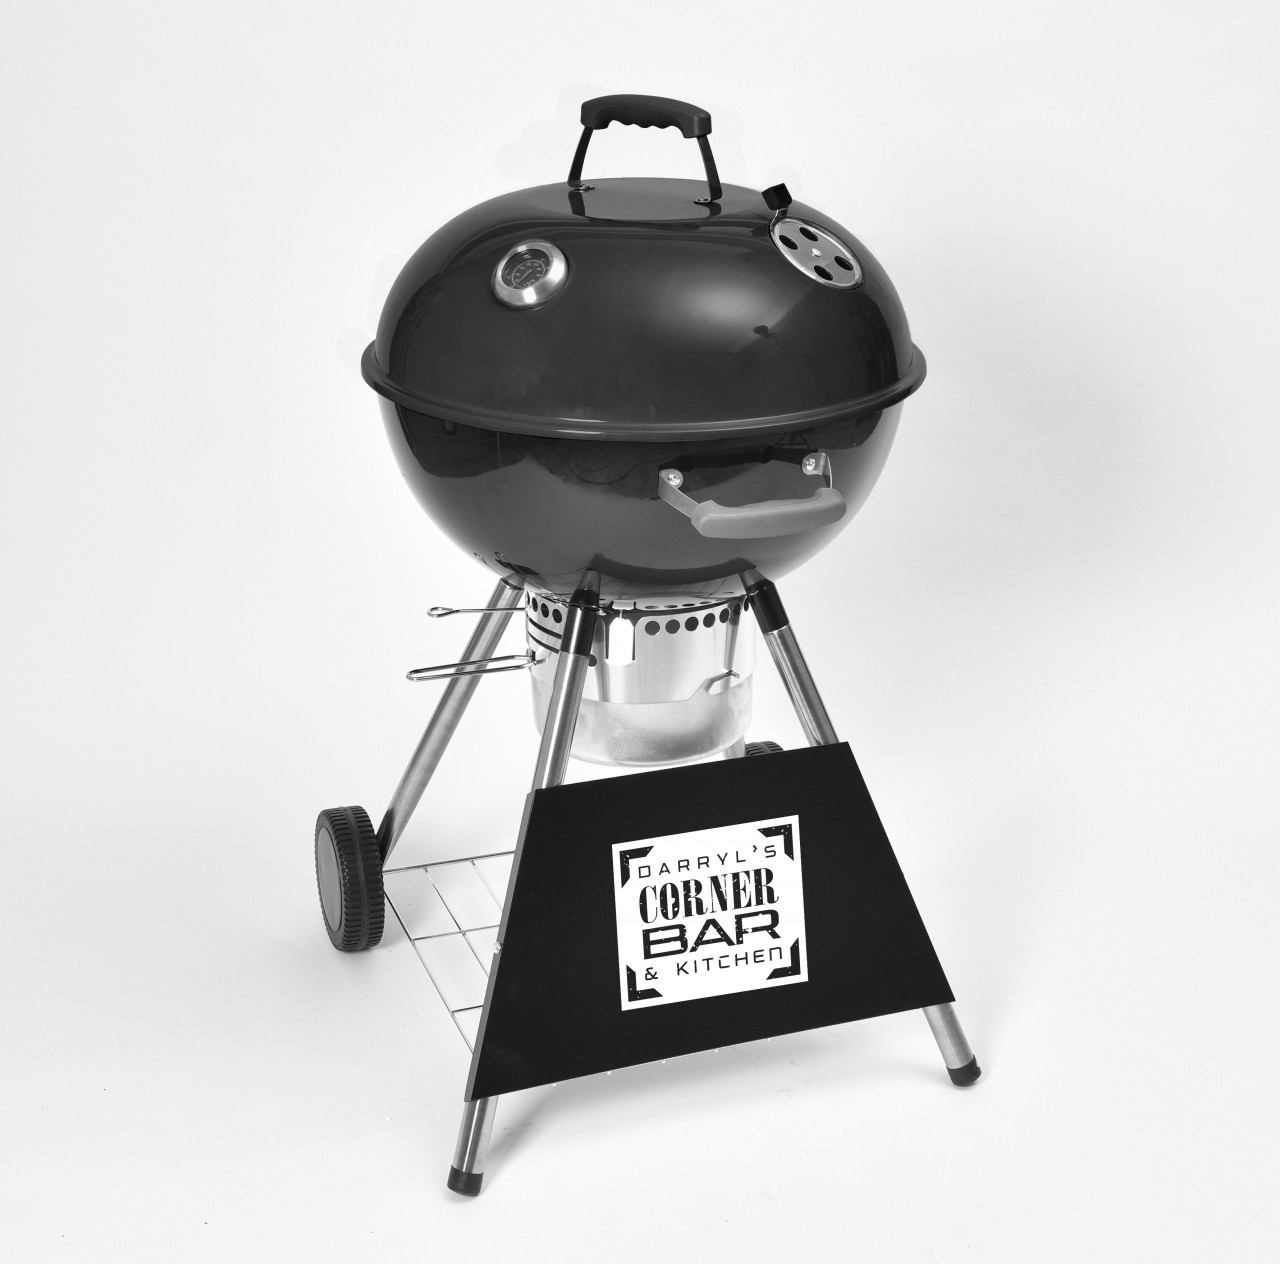 Kettle Grill